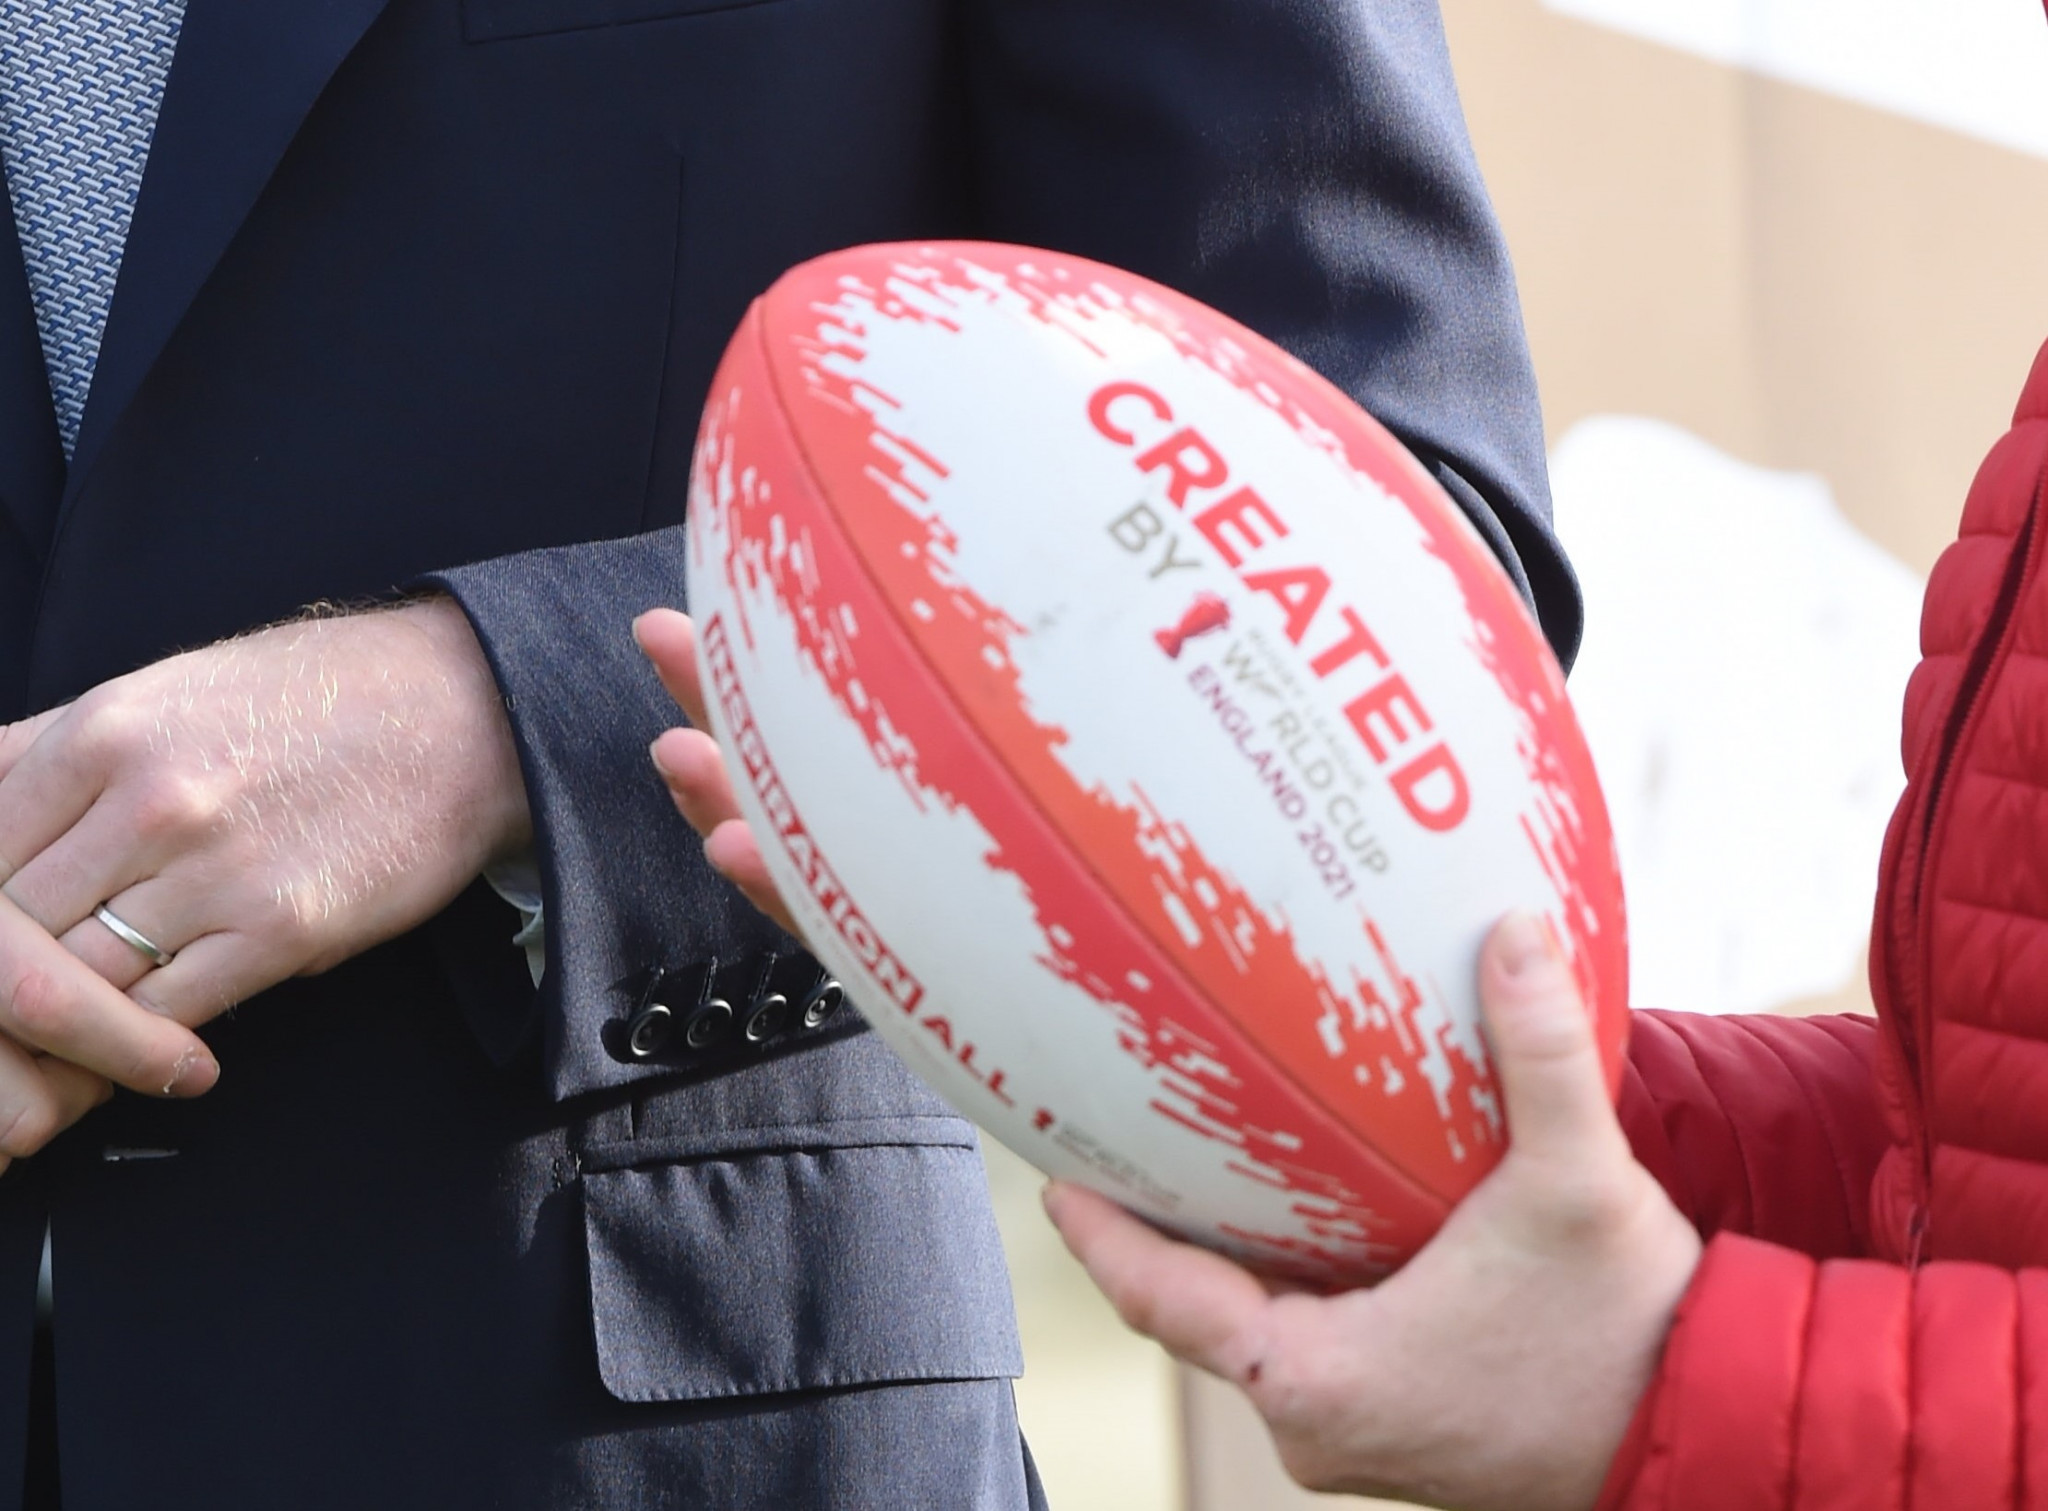 Three more community projects to benefit from 2021 Rugby League World Cup grant scheme